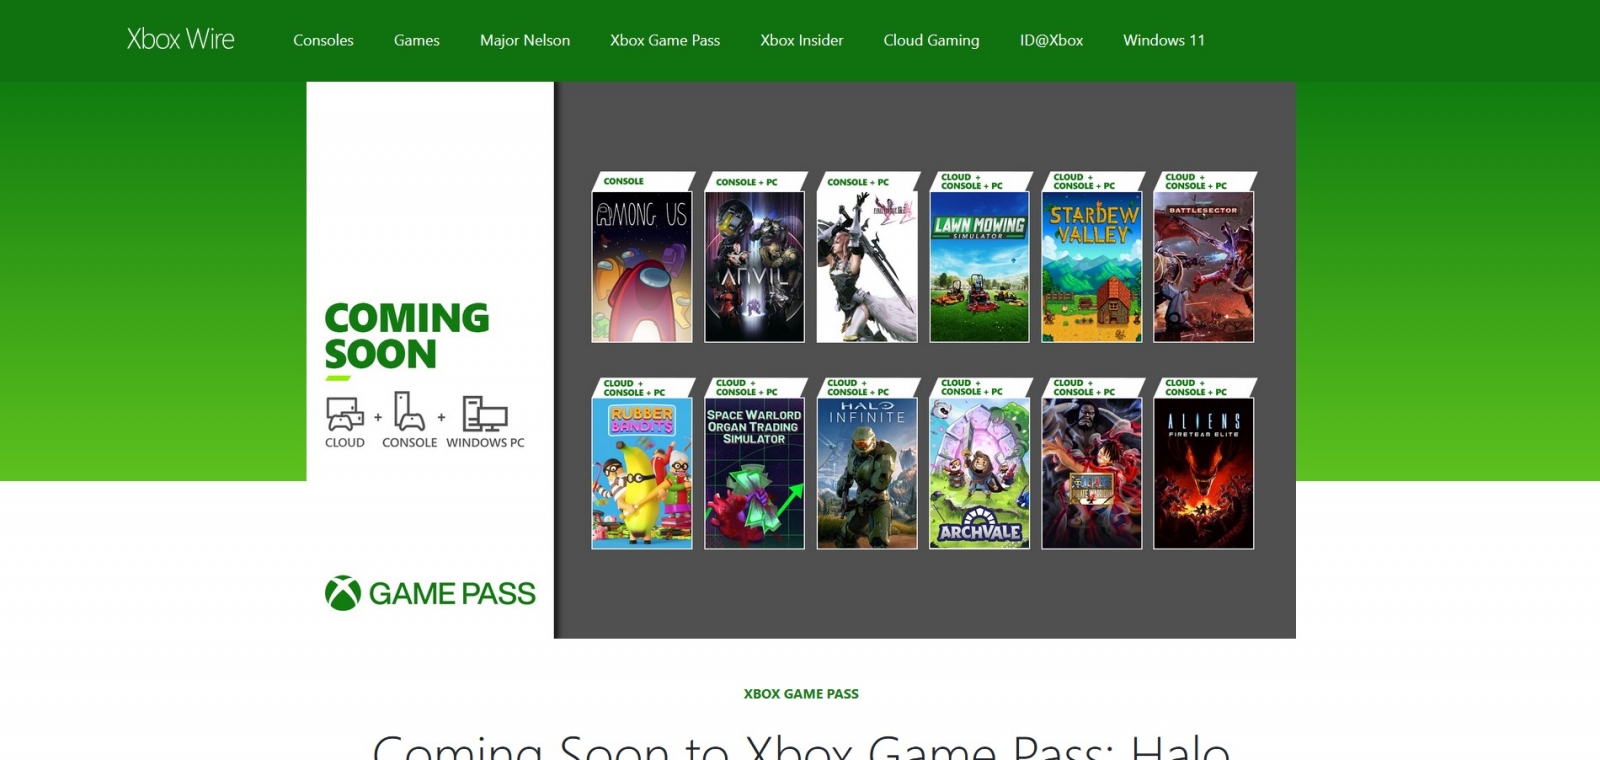 Games coming to Xbox Game Pass PC in December 2021: Stardew Valley, Halo  Infinite Campaign, One